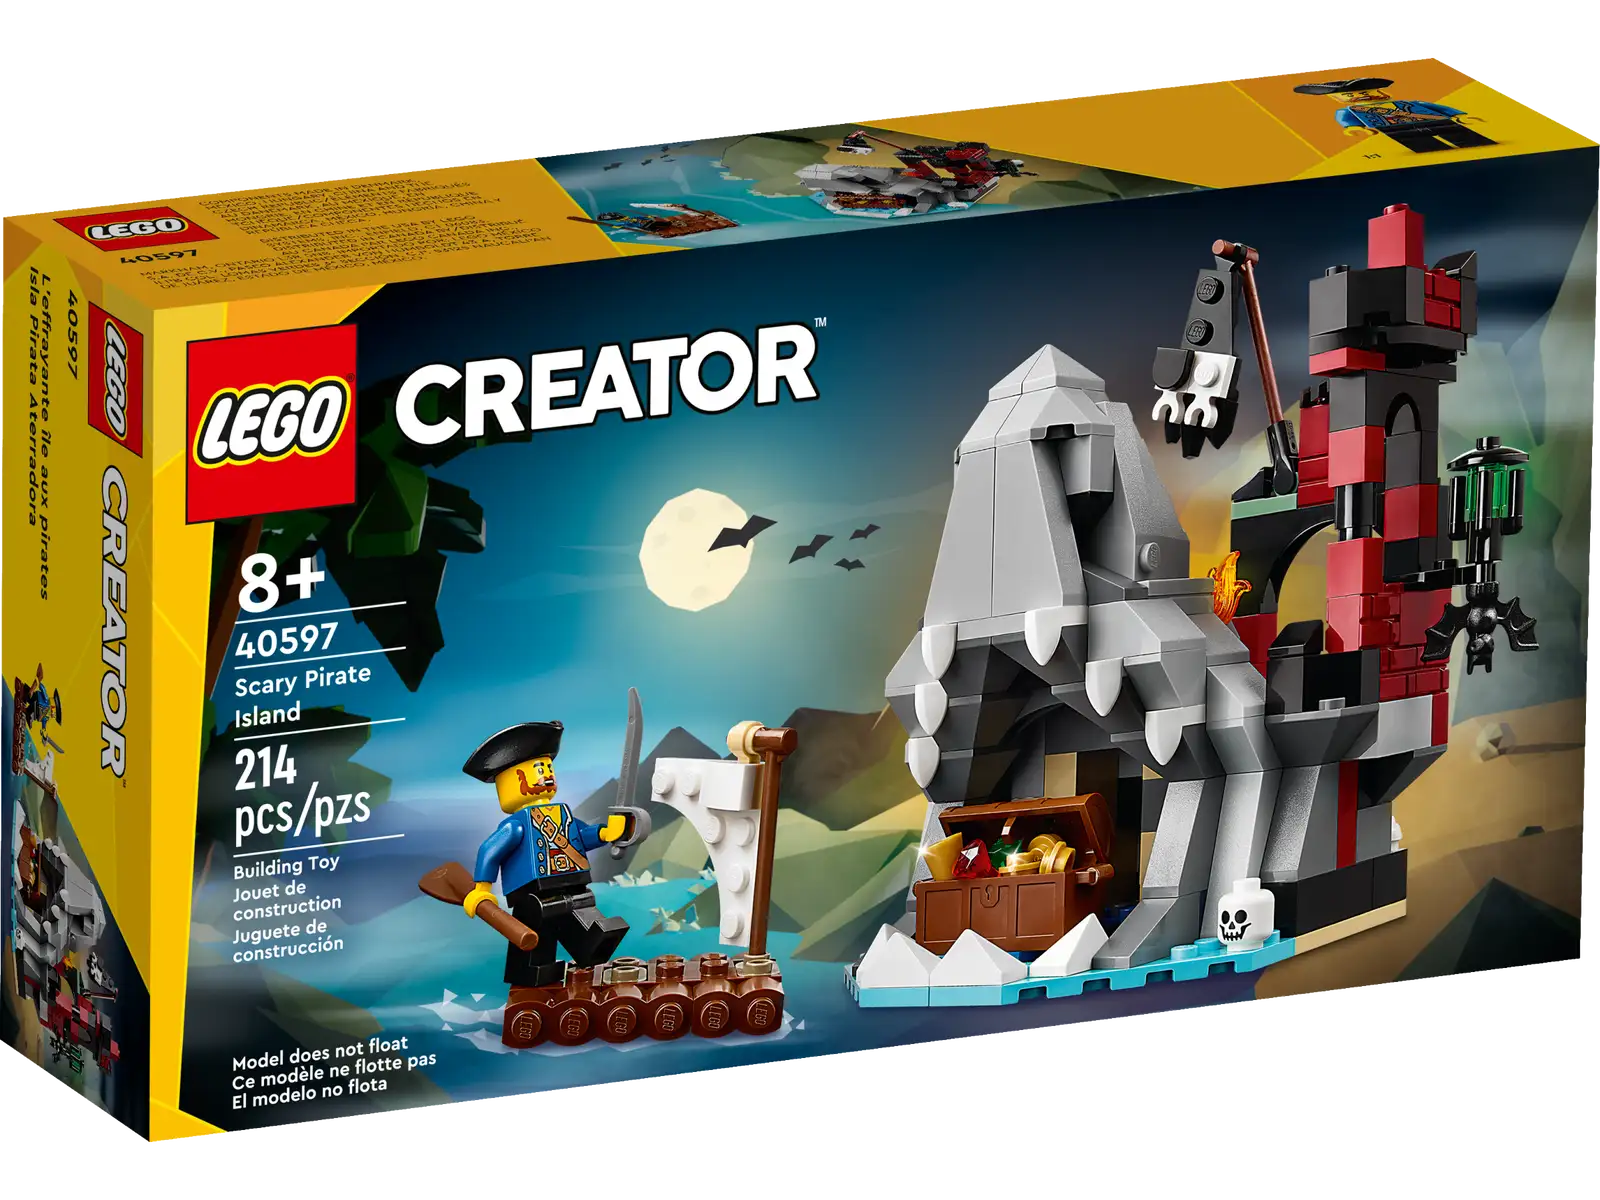 LEGO® fans can celebrate Halloween by staging their own adventures on Scary Pirate Island (40597). The island features a shark’s head with a cave inside its open jaws, plus a creepy castle ruin with a staircase. Explorers can find a treasure chestfull of gold and jewelry, a skull and a bat. Paddling towards the island on a raft is a treasure-seeking pirate with an oar and a sword. A Halloween gift for kids aged 8+, this set looks great on display and can be used to play out fun-filled stories. Celebrate Halloween – This LEGO® Creator Scary Pirate Island buildable toy for kids features a shark’s head, a castle ruin, a bat and a pirate minifigure on a raft A gift for ages 8+ – Give this 214-piece island to little builders who have a passion for pirates and dreaming up scary stories Play anywhere – The island measures over 5 in. (13 cm) high, 4.5 in. (12 cm) wide and 3.5 in. (9 cm) deep, the perfect size for kids to play with at home or take on the go